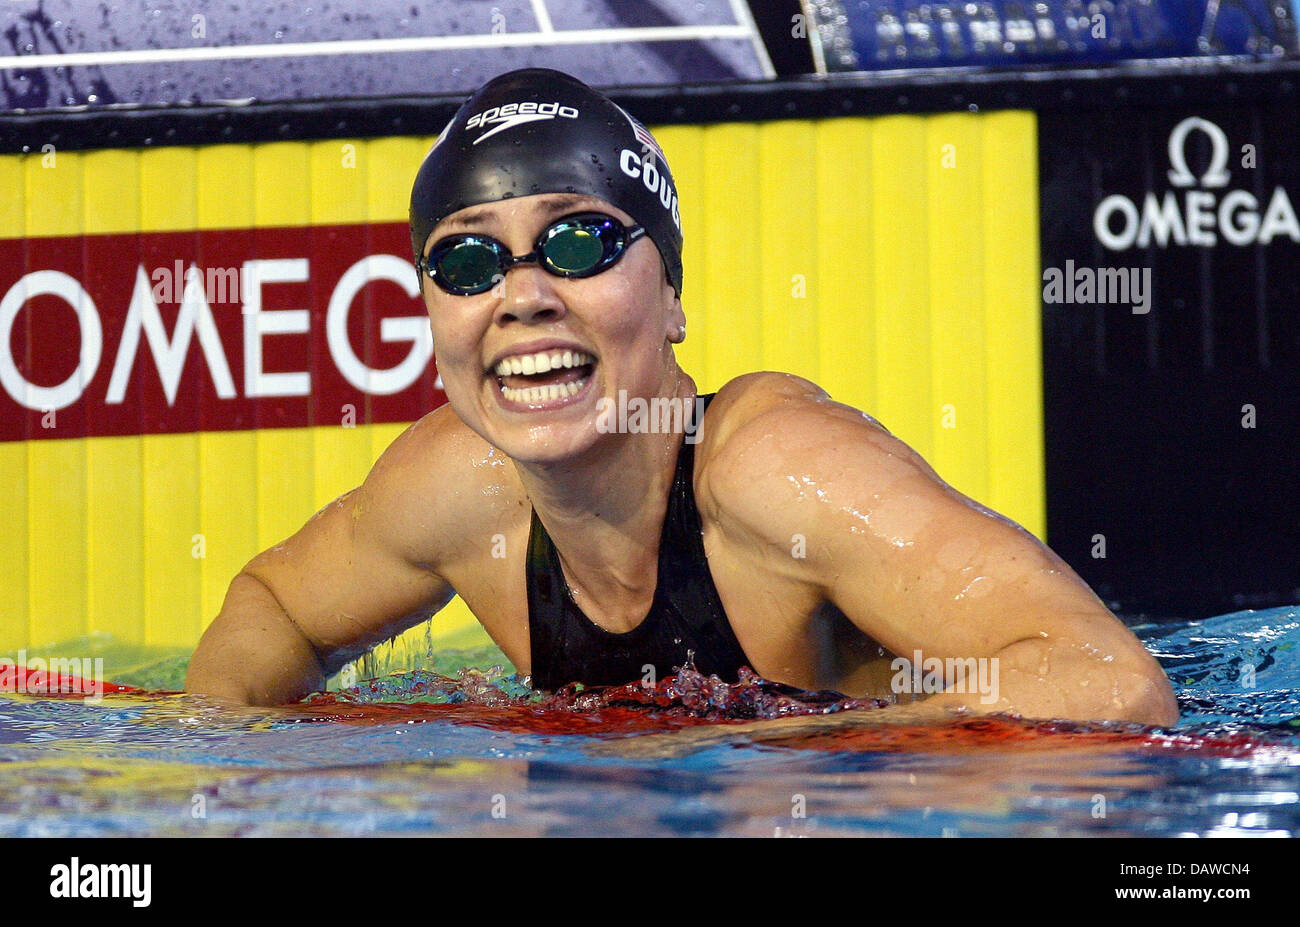 US-American swimmer Natalie Coughlin smiles after achieving the minimum time at the 100 meters freestyle at the FINA World Swimming Championships in Melbourne, Australia, Thursday, 29 March 2007. Photo: Gero Breloer Stock Photo